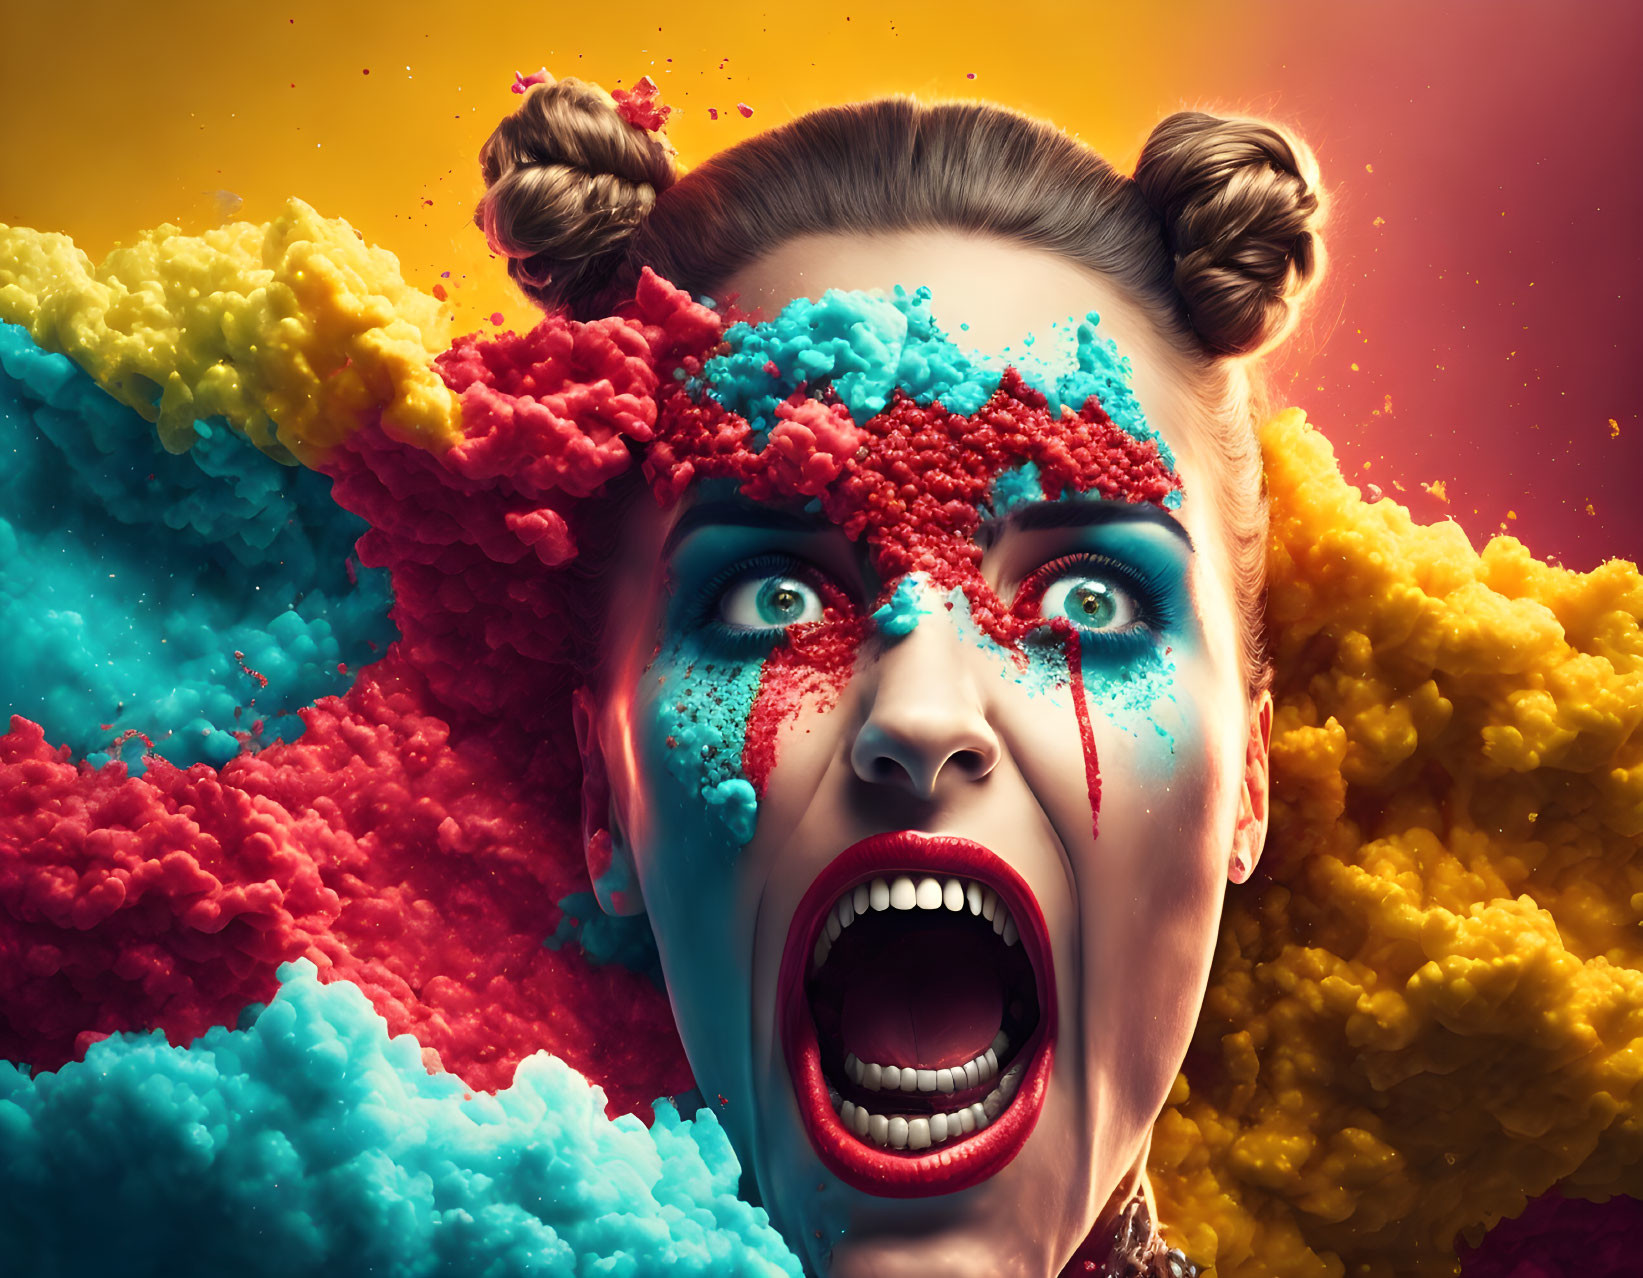 Vivid makeup woman surrounded by colorful powder explosion